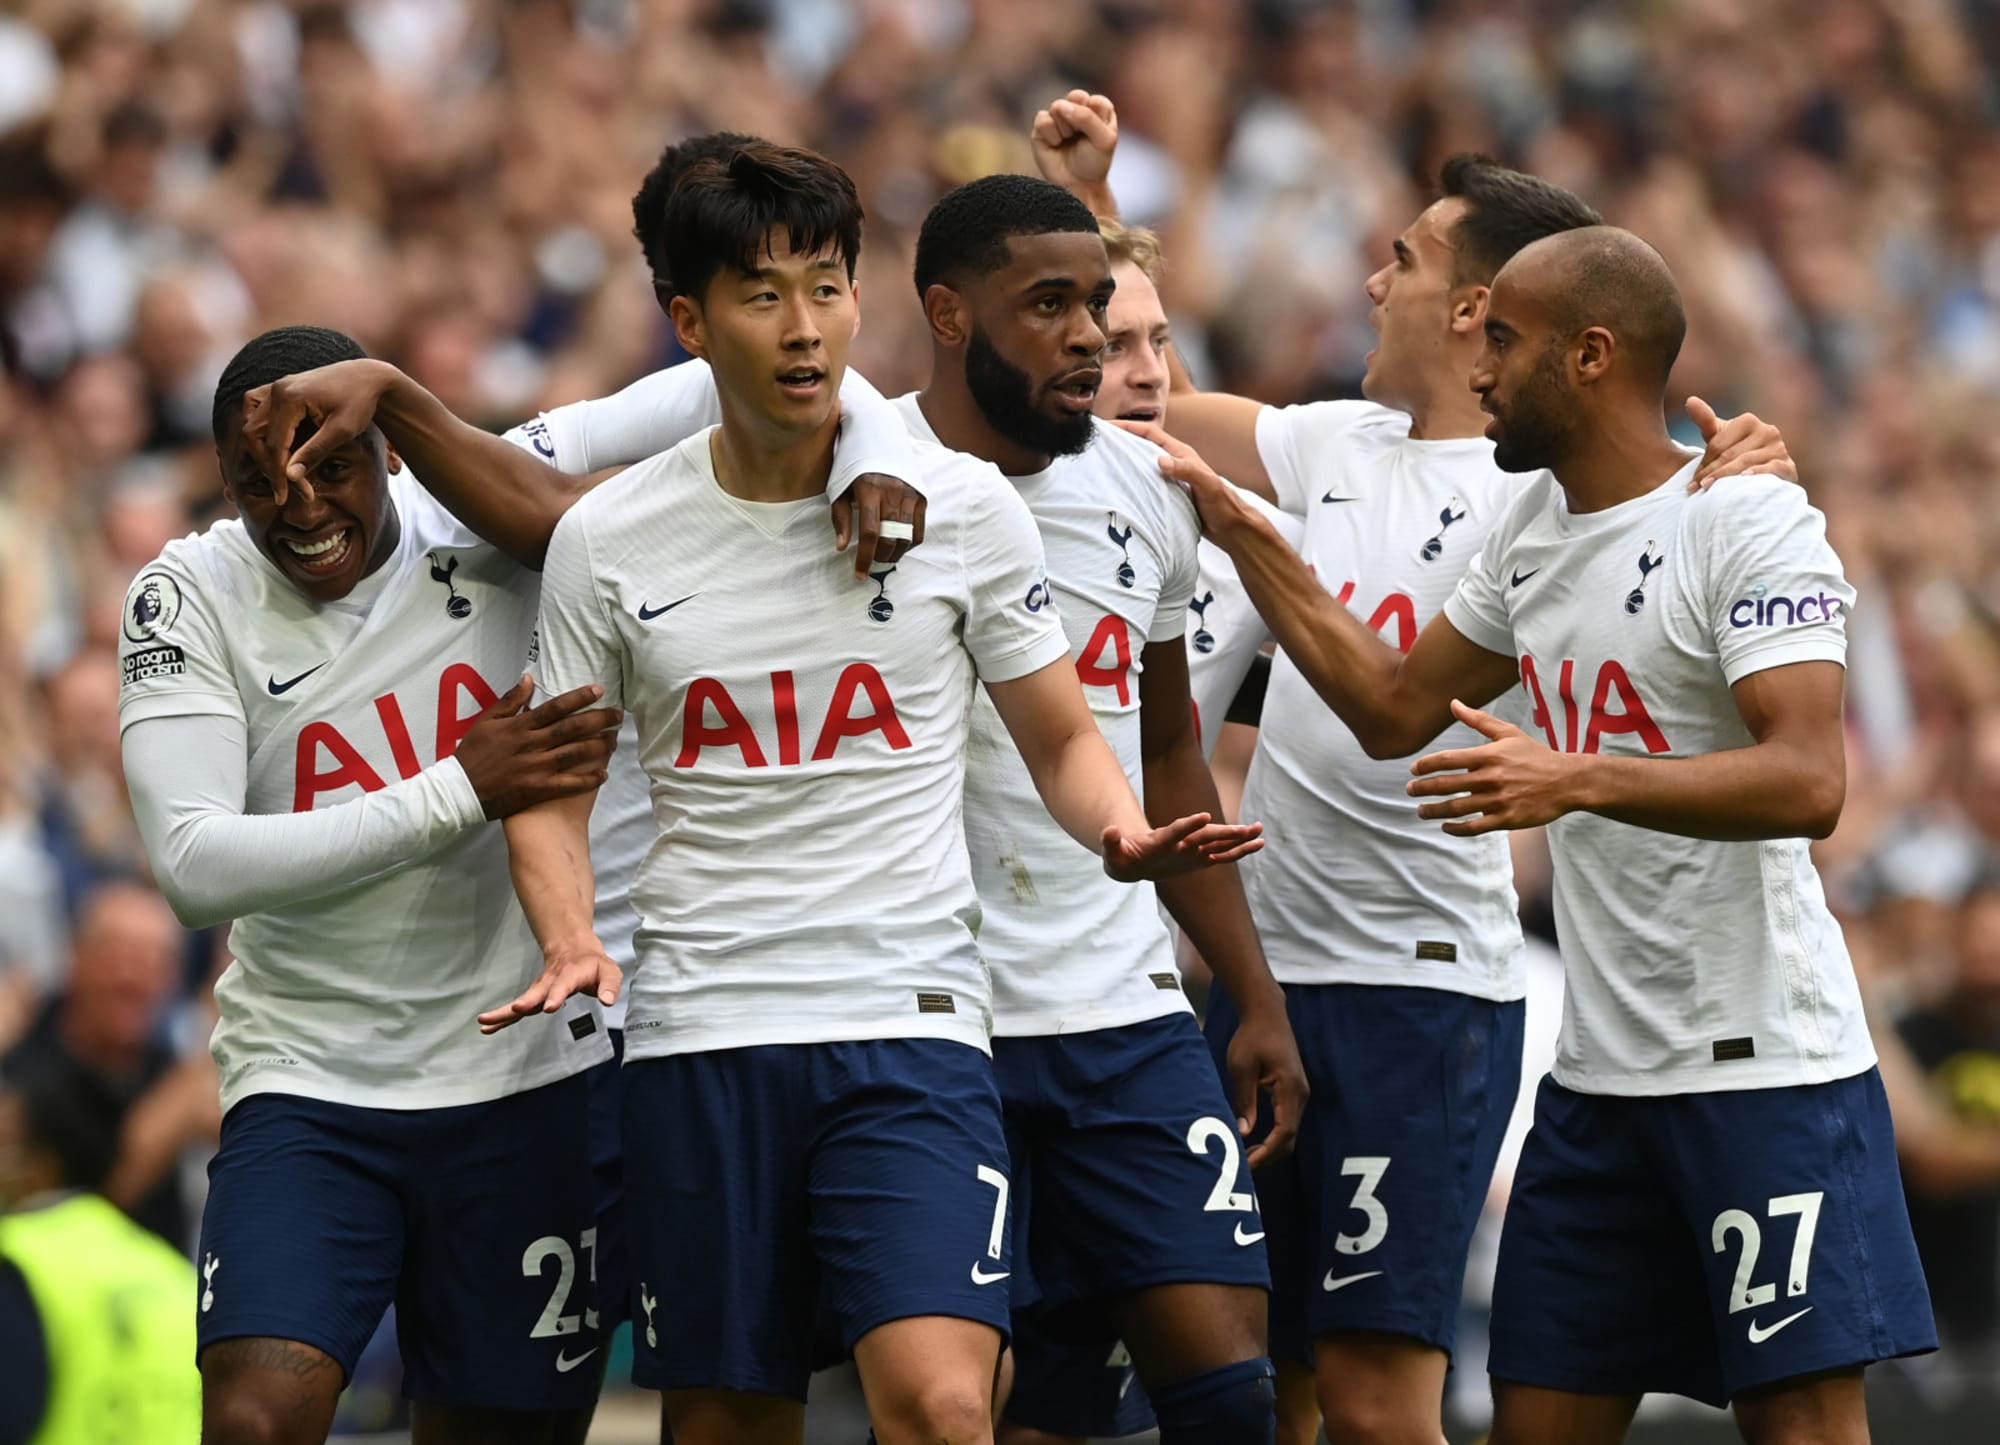 The biggest concern for Tottenham following victory over Manchester City